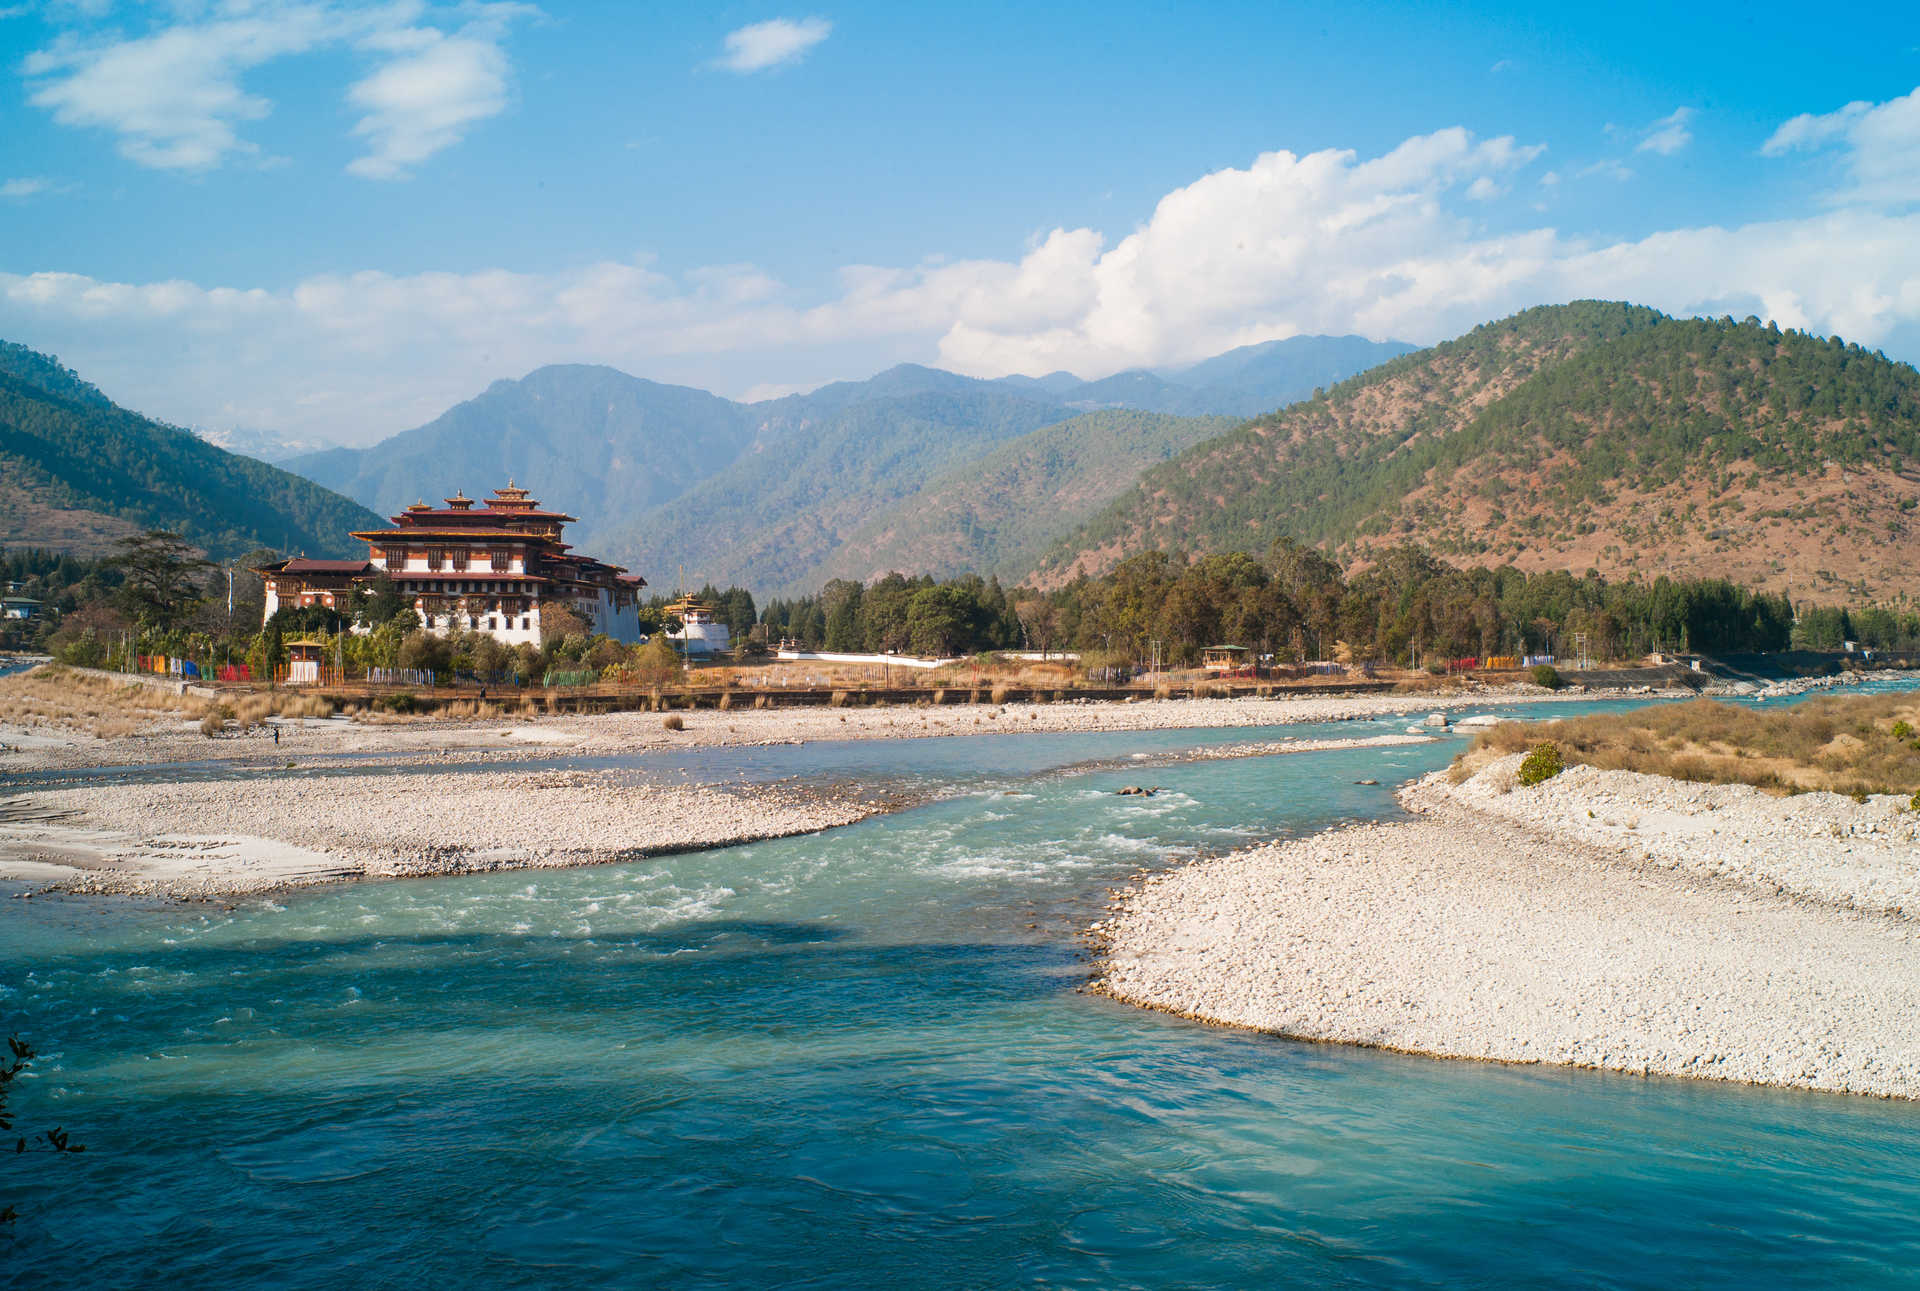 Temple overlooking the river in Punakha, Bhutan